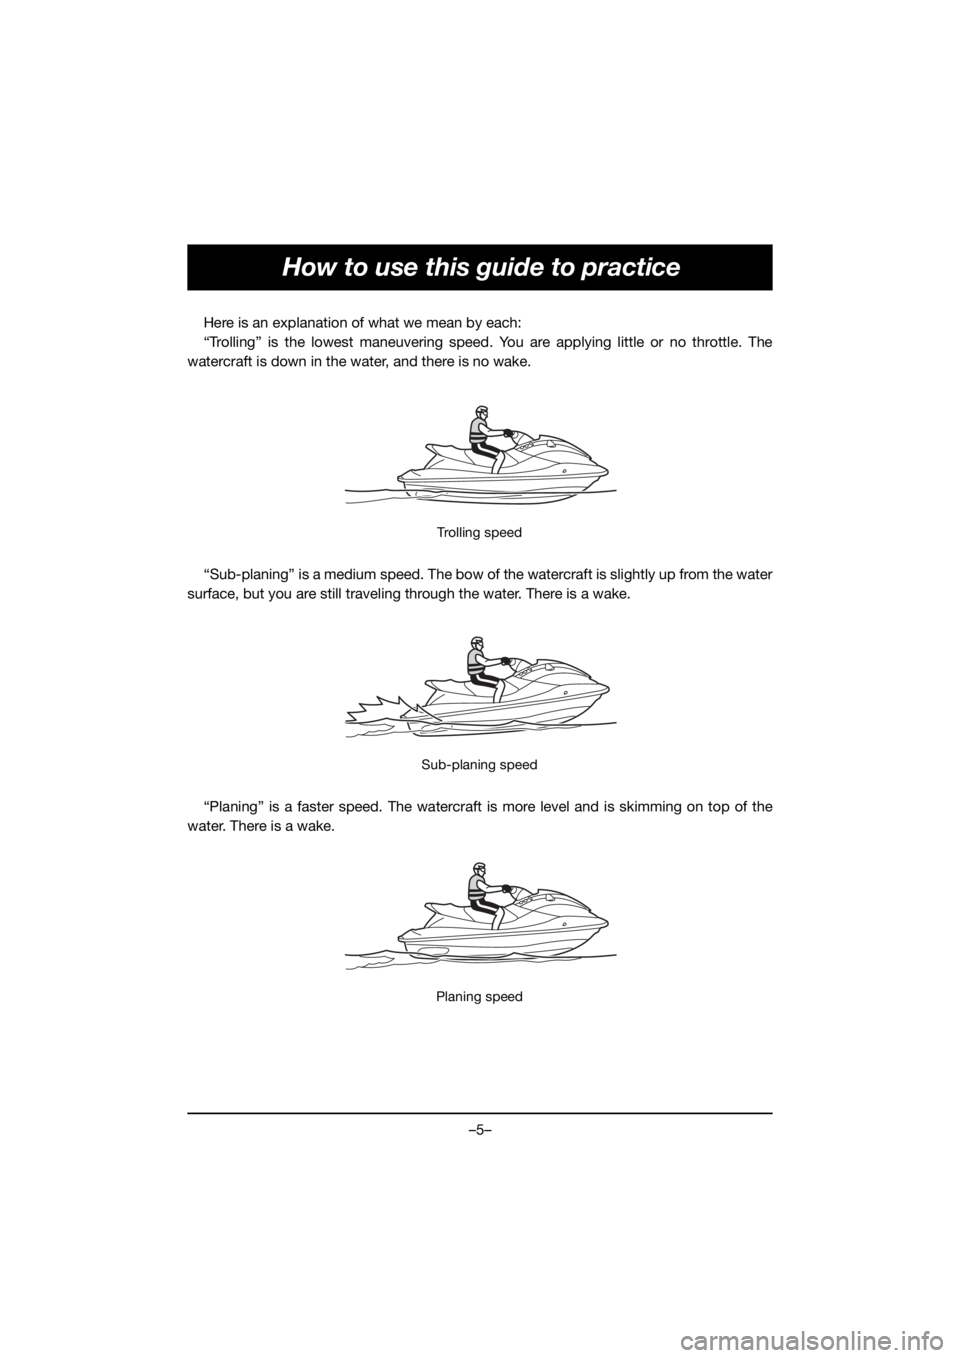 YAMAHA GP1800R SVHO 2021  Manuale duso (in Italian) –5–
How to use this guide to practice
Here is an explanation of what we mean by each:
“Trolling” is the lowest maneuvering speed. You are applying little or no throttle. The
watercraft is down